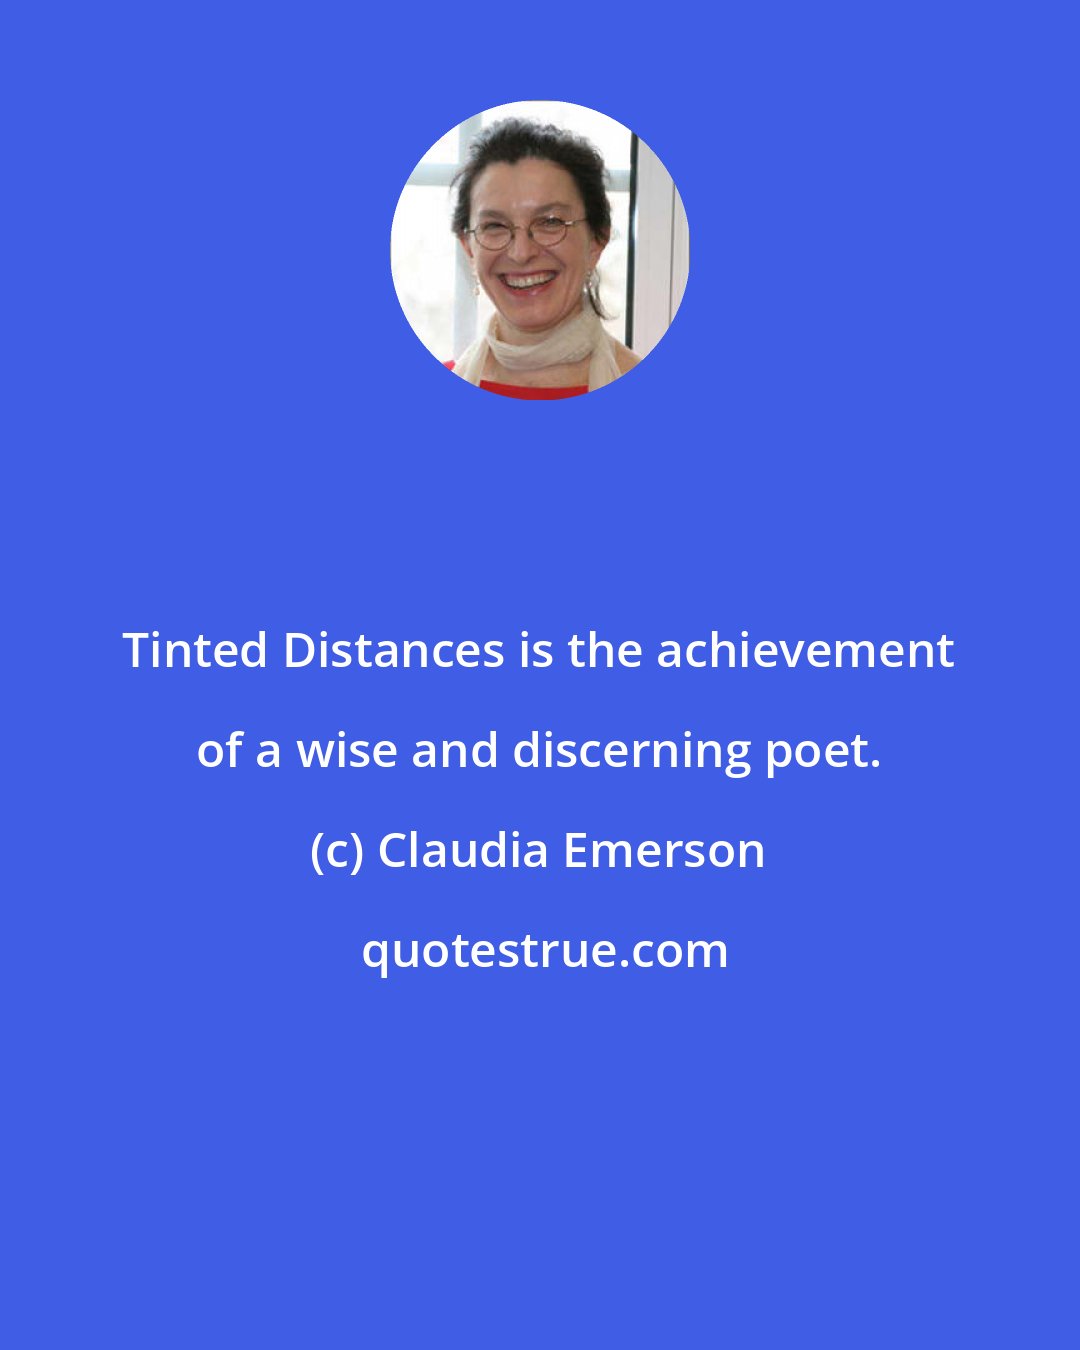 Claudia Emerson: Tinted Distances is the achievement of a wise and discerning poet.